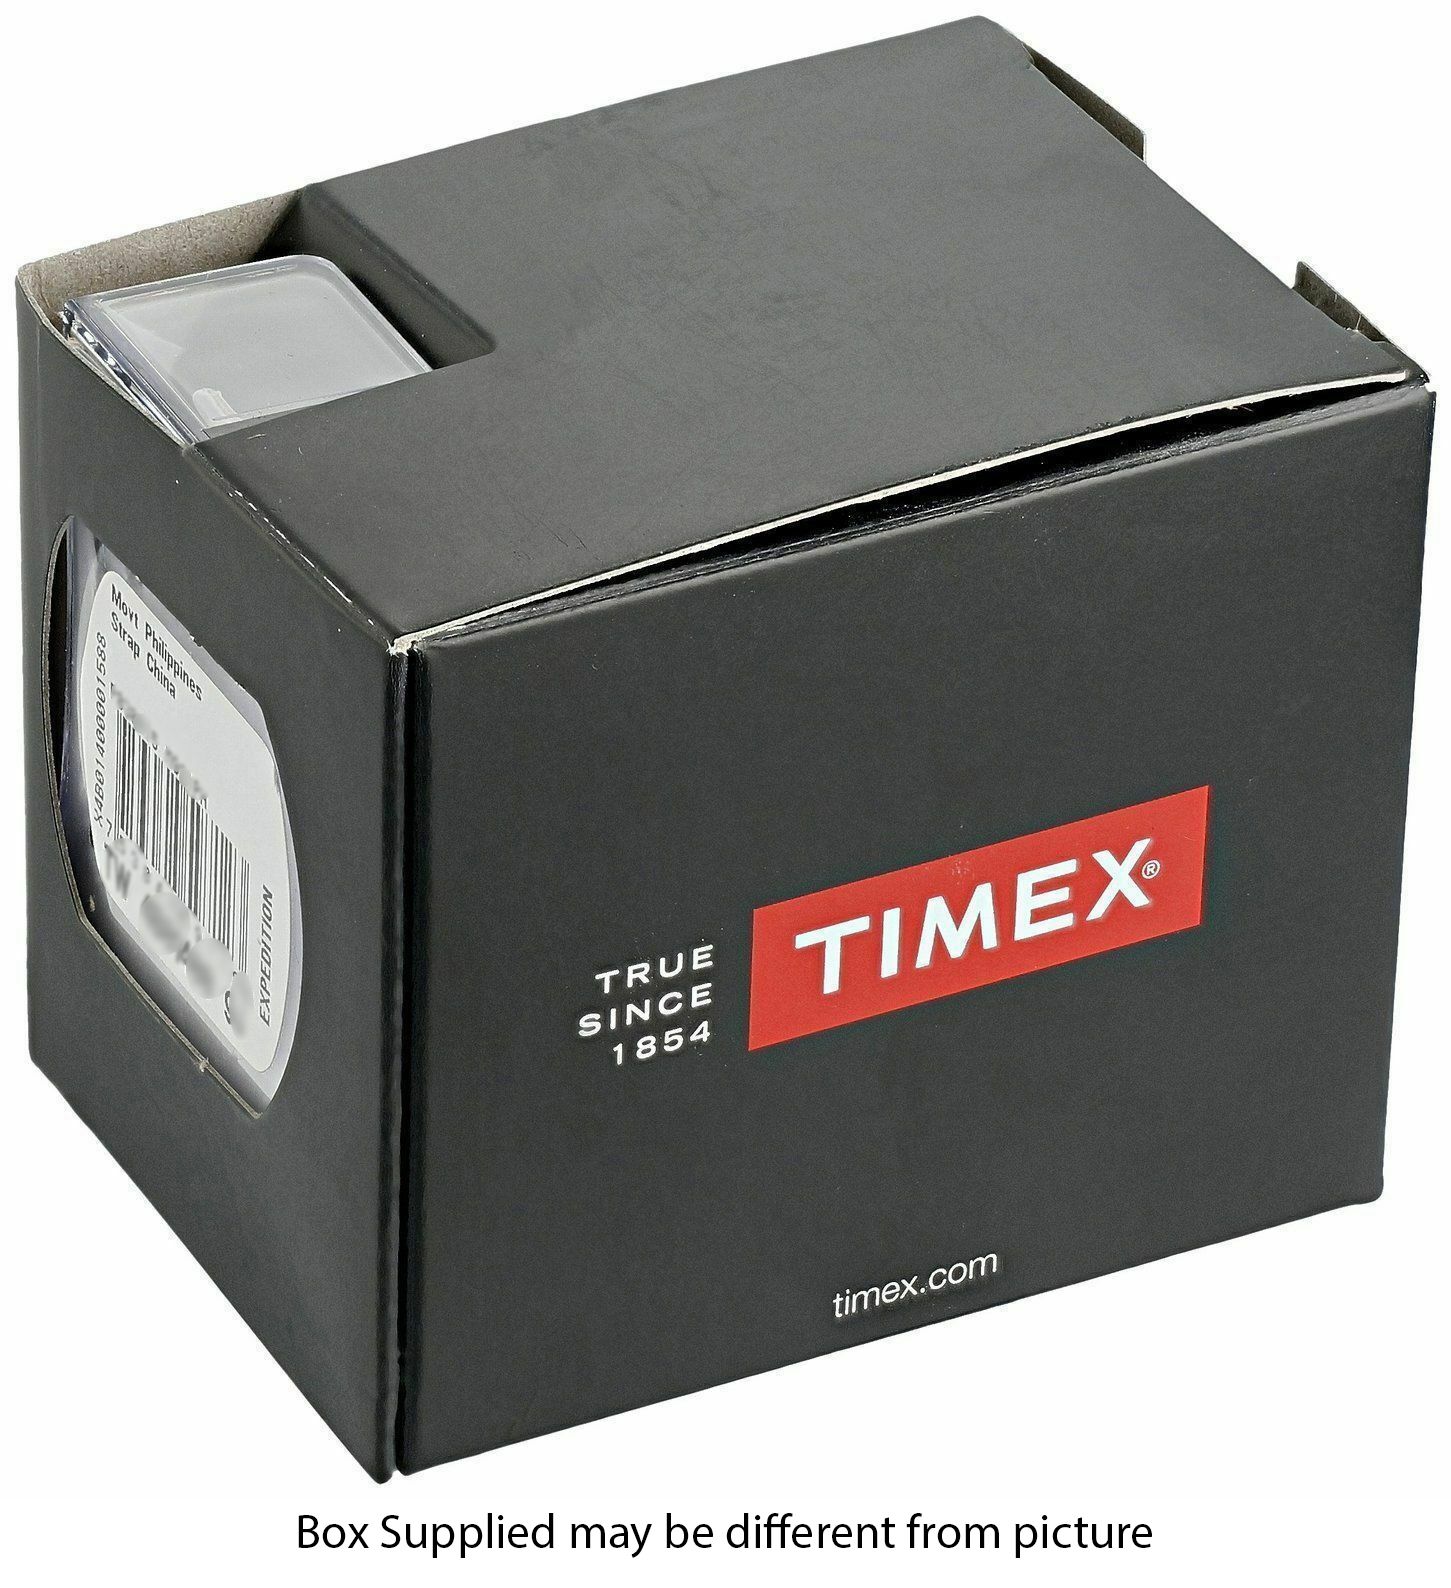 This Timex Harborside Multi Dial Watch for Men is the perfect timepiece to wear or to gift. It's Silver 42 mm Round case combined with the comfortable Brown Leather watch band will ensure you enjoy this stunning timepiece without any compromise. Operated by a high quality Quartz movement and water resistant to 5 bars, your watch will keep ticking. This casual and modern watch is perfect for all kind of casual activities, indoor activities or daily use, it's also a great gift for family and friend. -The watch has a calendar function: Day-Date, Luminous Hands, Luminous Numbers, 24-hour Display High quality 21 cm length and 19 mm width Brown Leather strap with a Buckle Case diameter: 42 mm,case thickness: 11 mm, case colour: Silver and dial colour: White